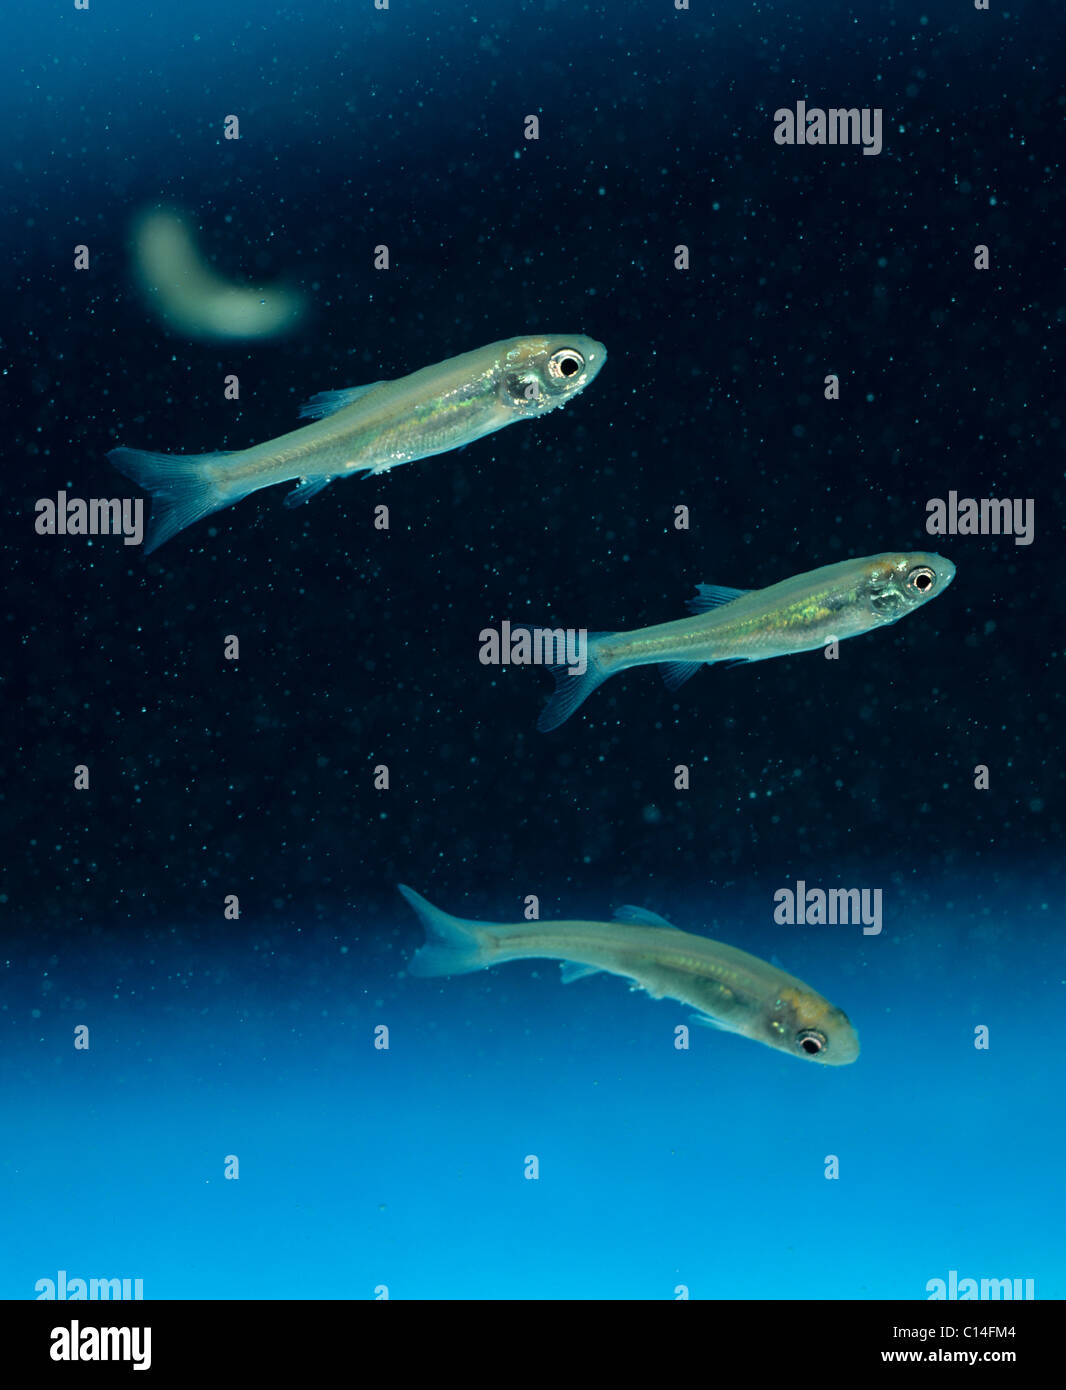 Fathead minnows (Pimephales promelas) fish used in ecological studies Stock Photo